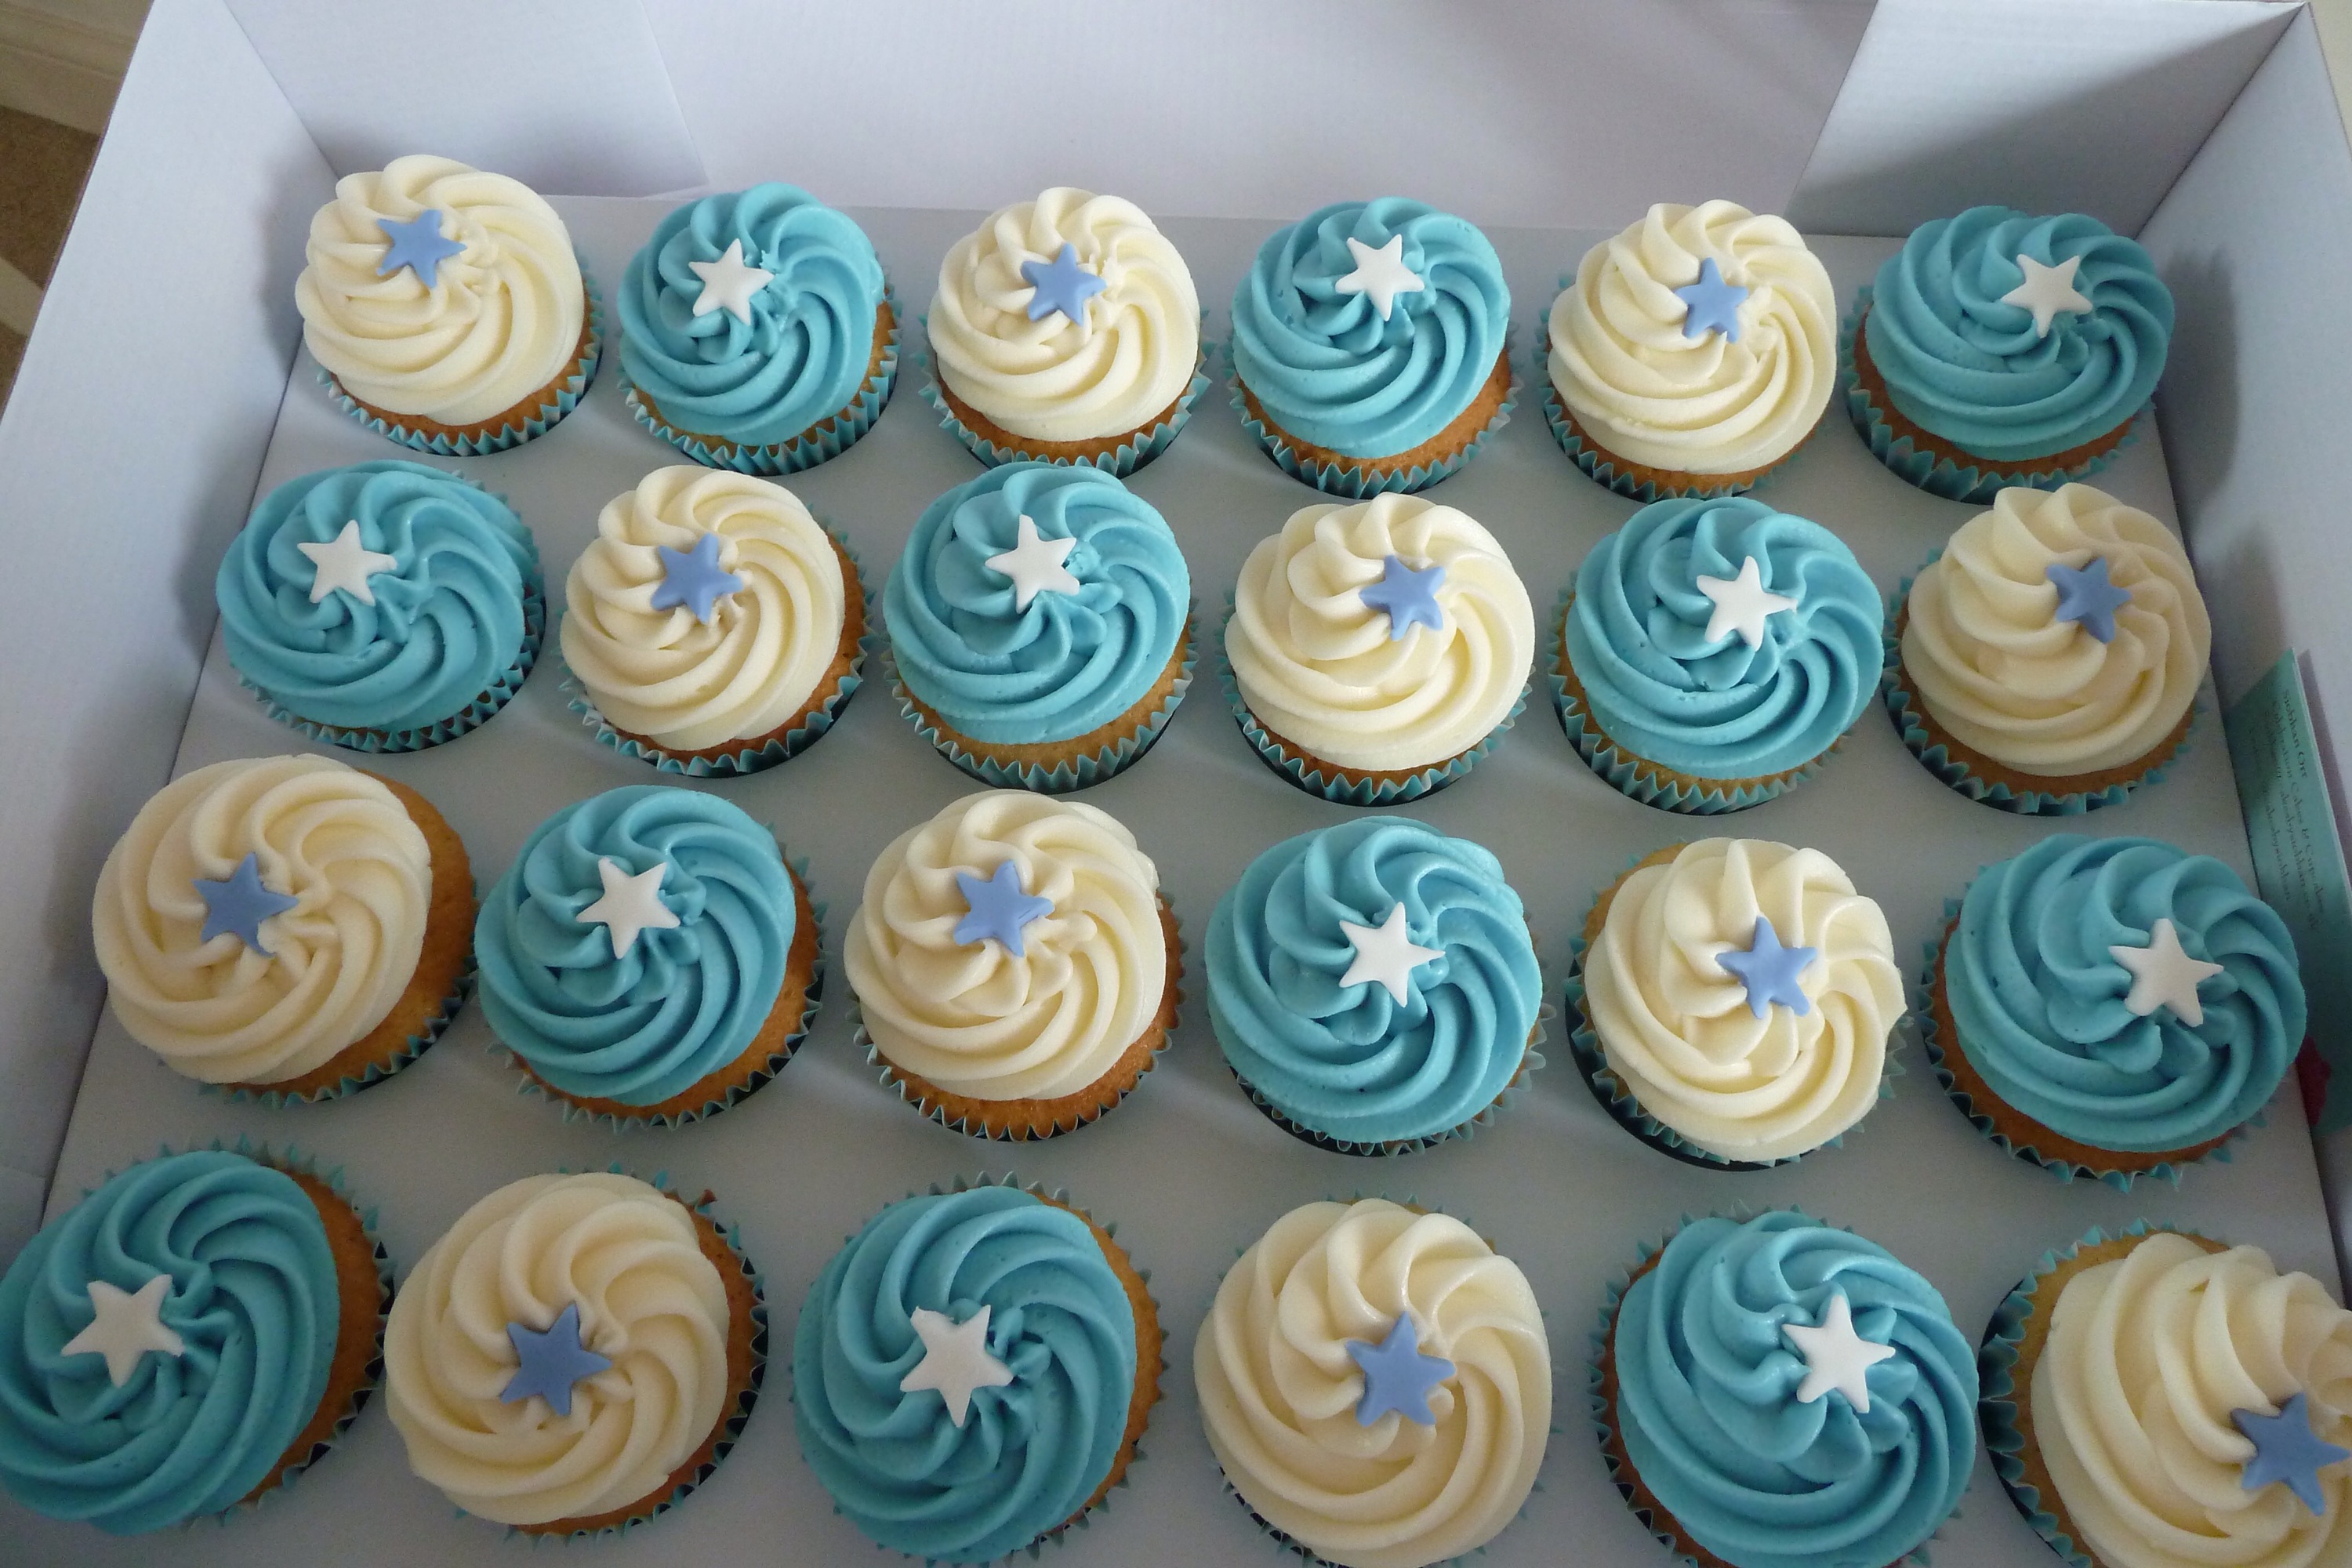 Christening Cake and Cupcakes for Boys